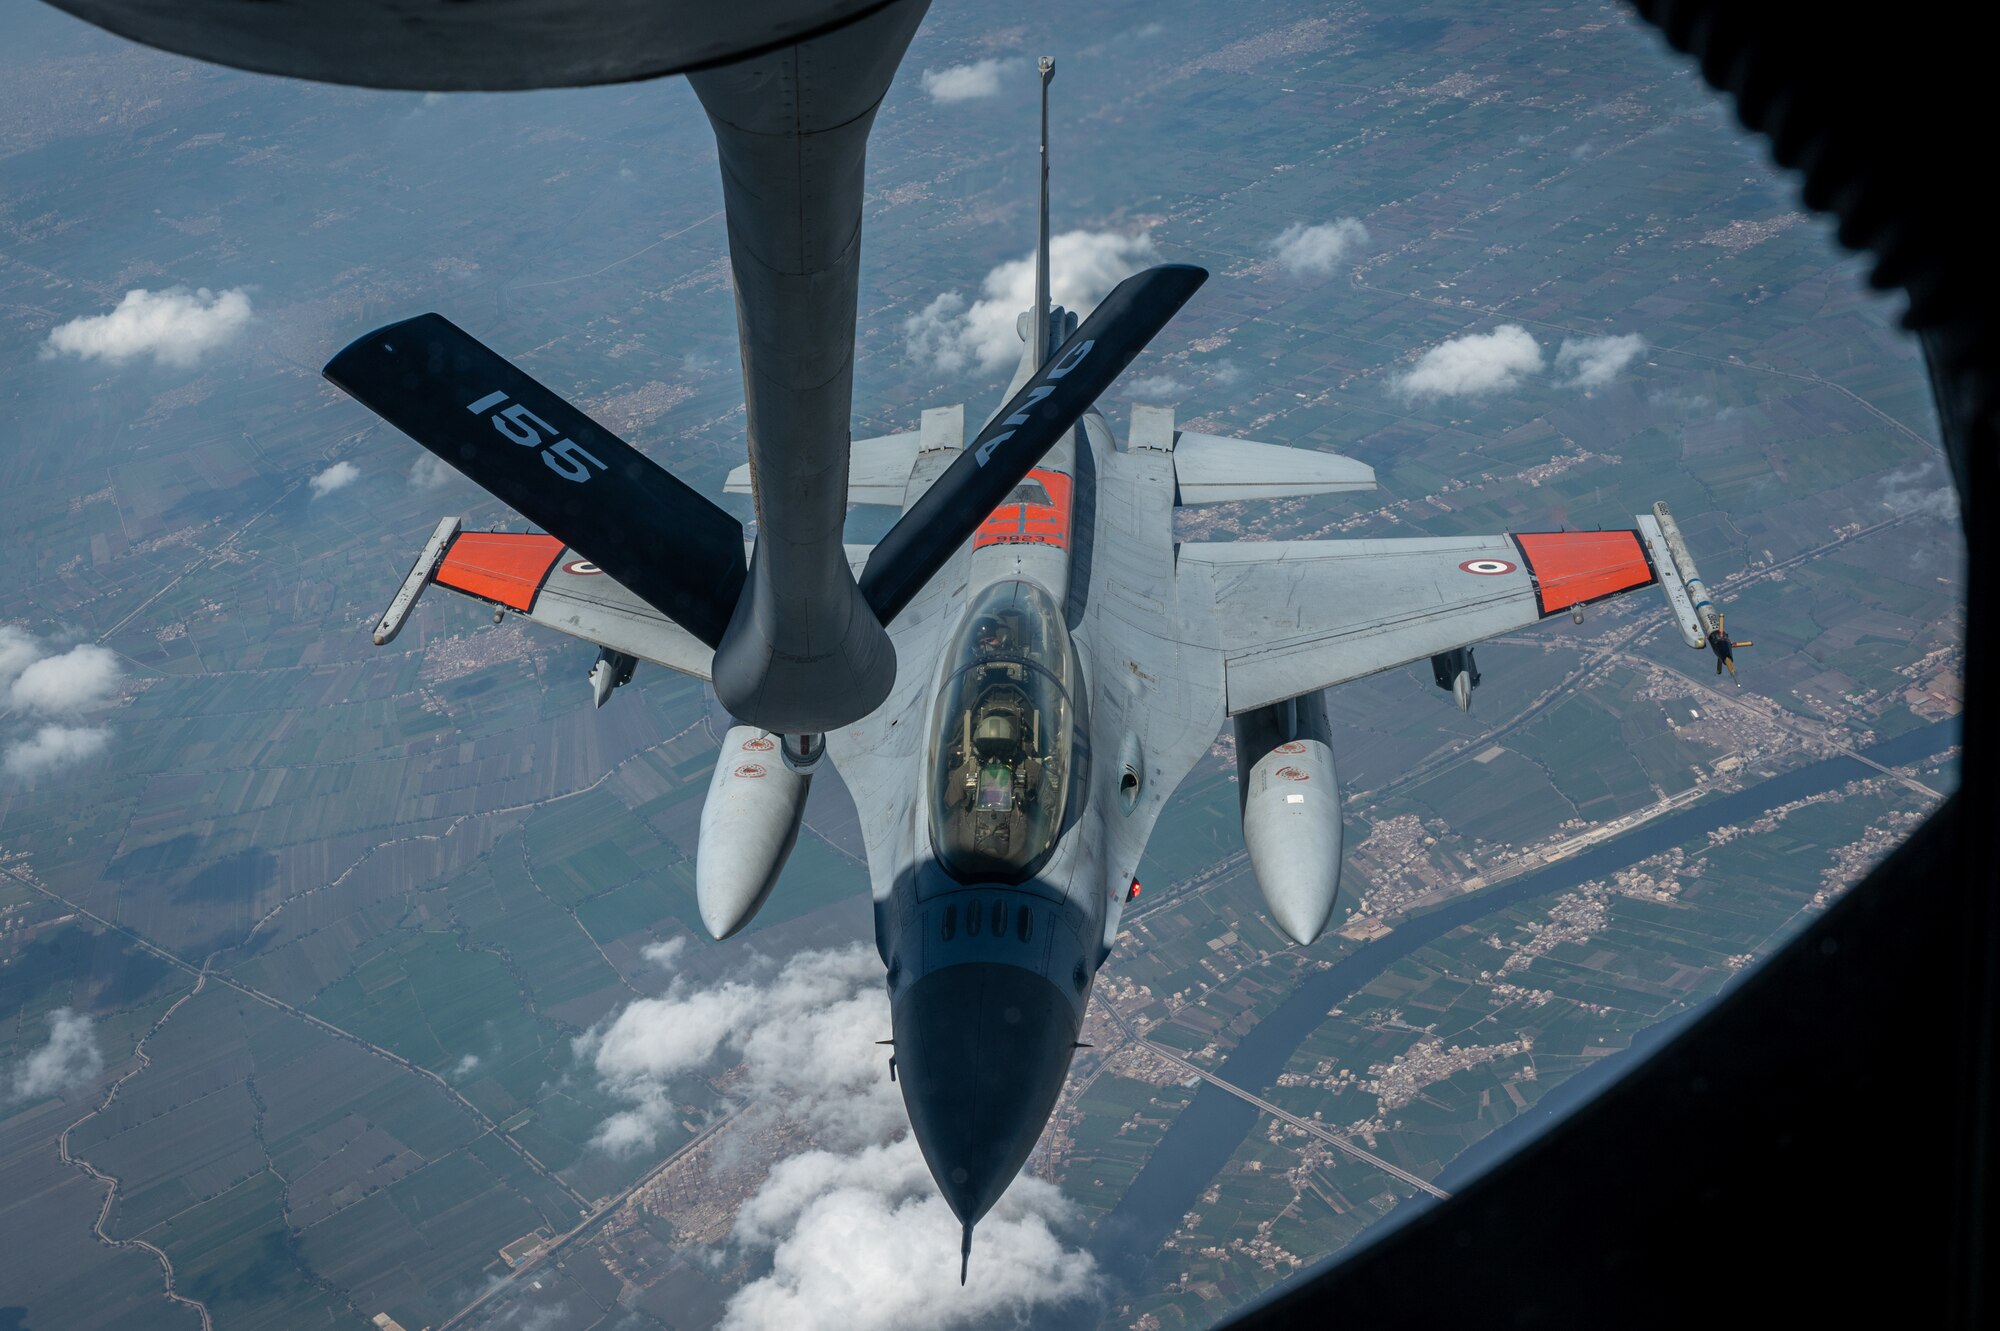 Egyptian Air Force F-16 aircraft conduct aerial training operations with U.S. Air Force partners in support of exercise Agile Phoenix within the U.S. Air Forces Central area of responsibility June 29, 2022. Agile Phoenix is a joint agile combat employment exercise focused on enhancing interoperability and ensuring regional security. (U.S. Air Force photo by Senior Airman Dominic Tyler)